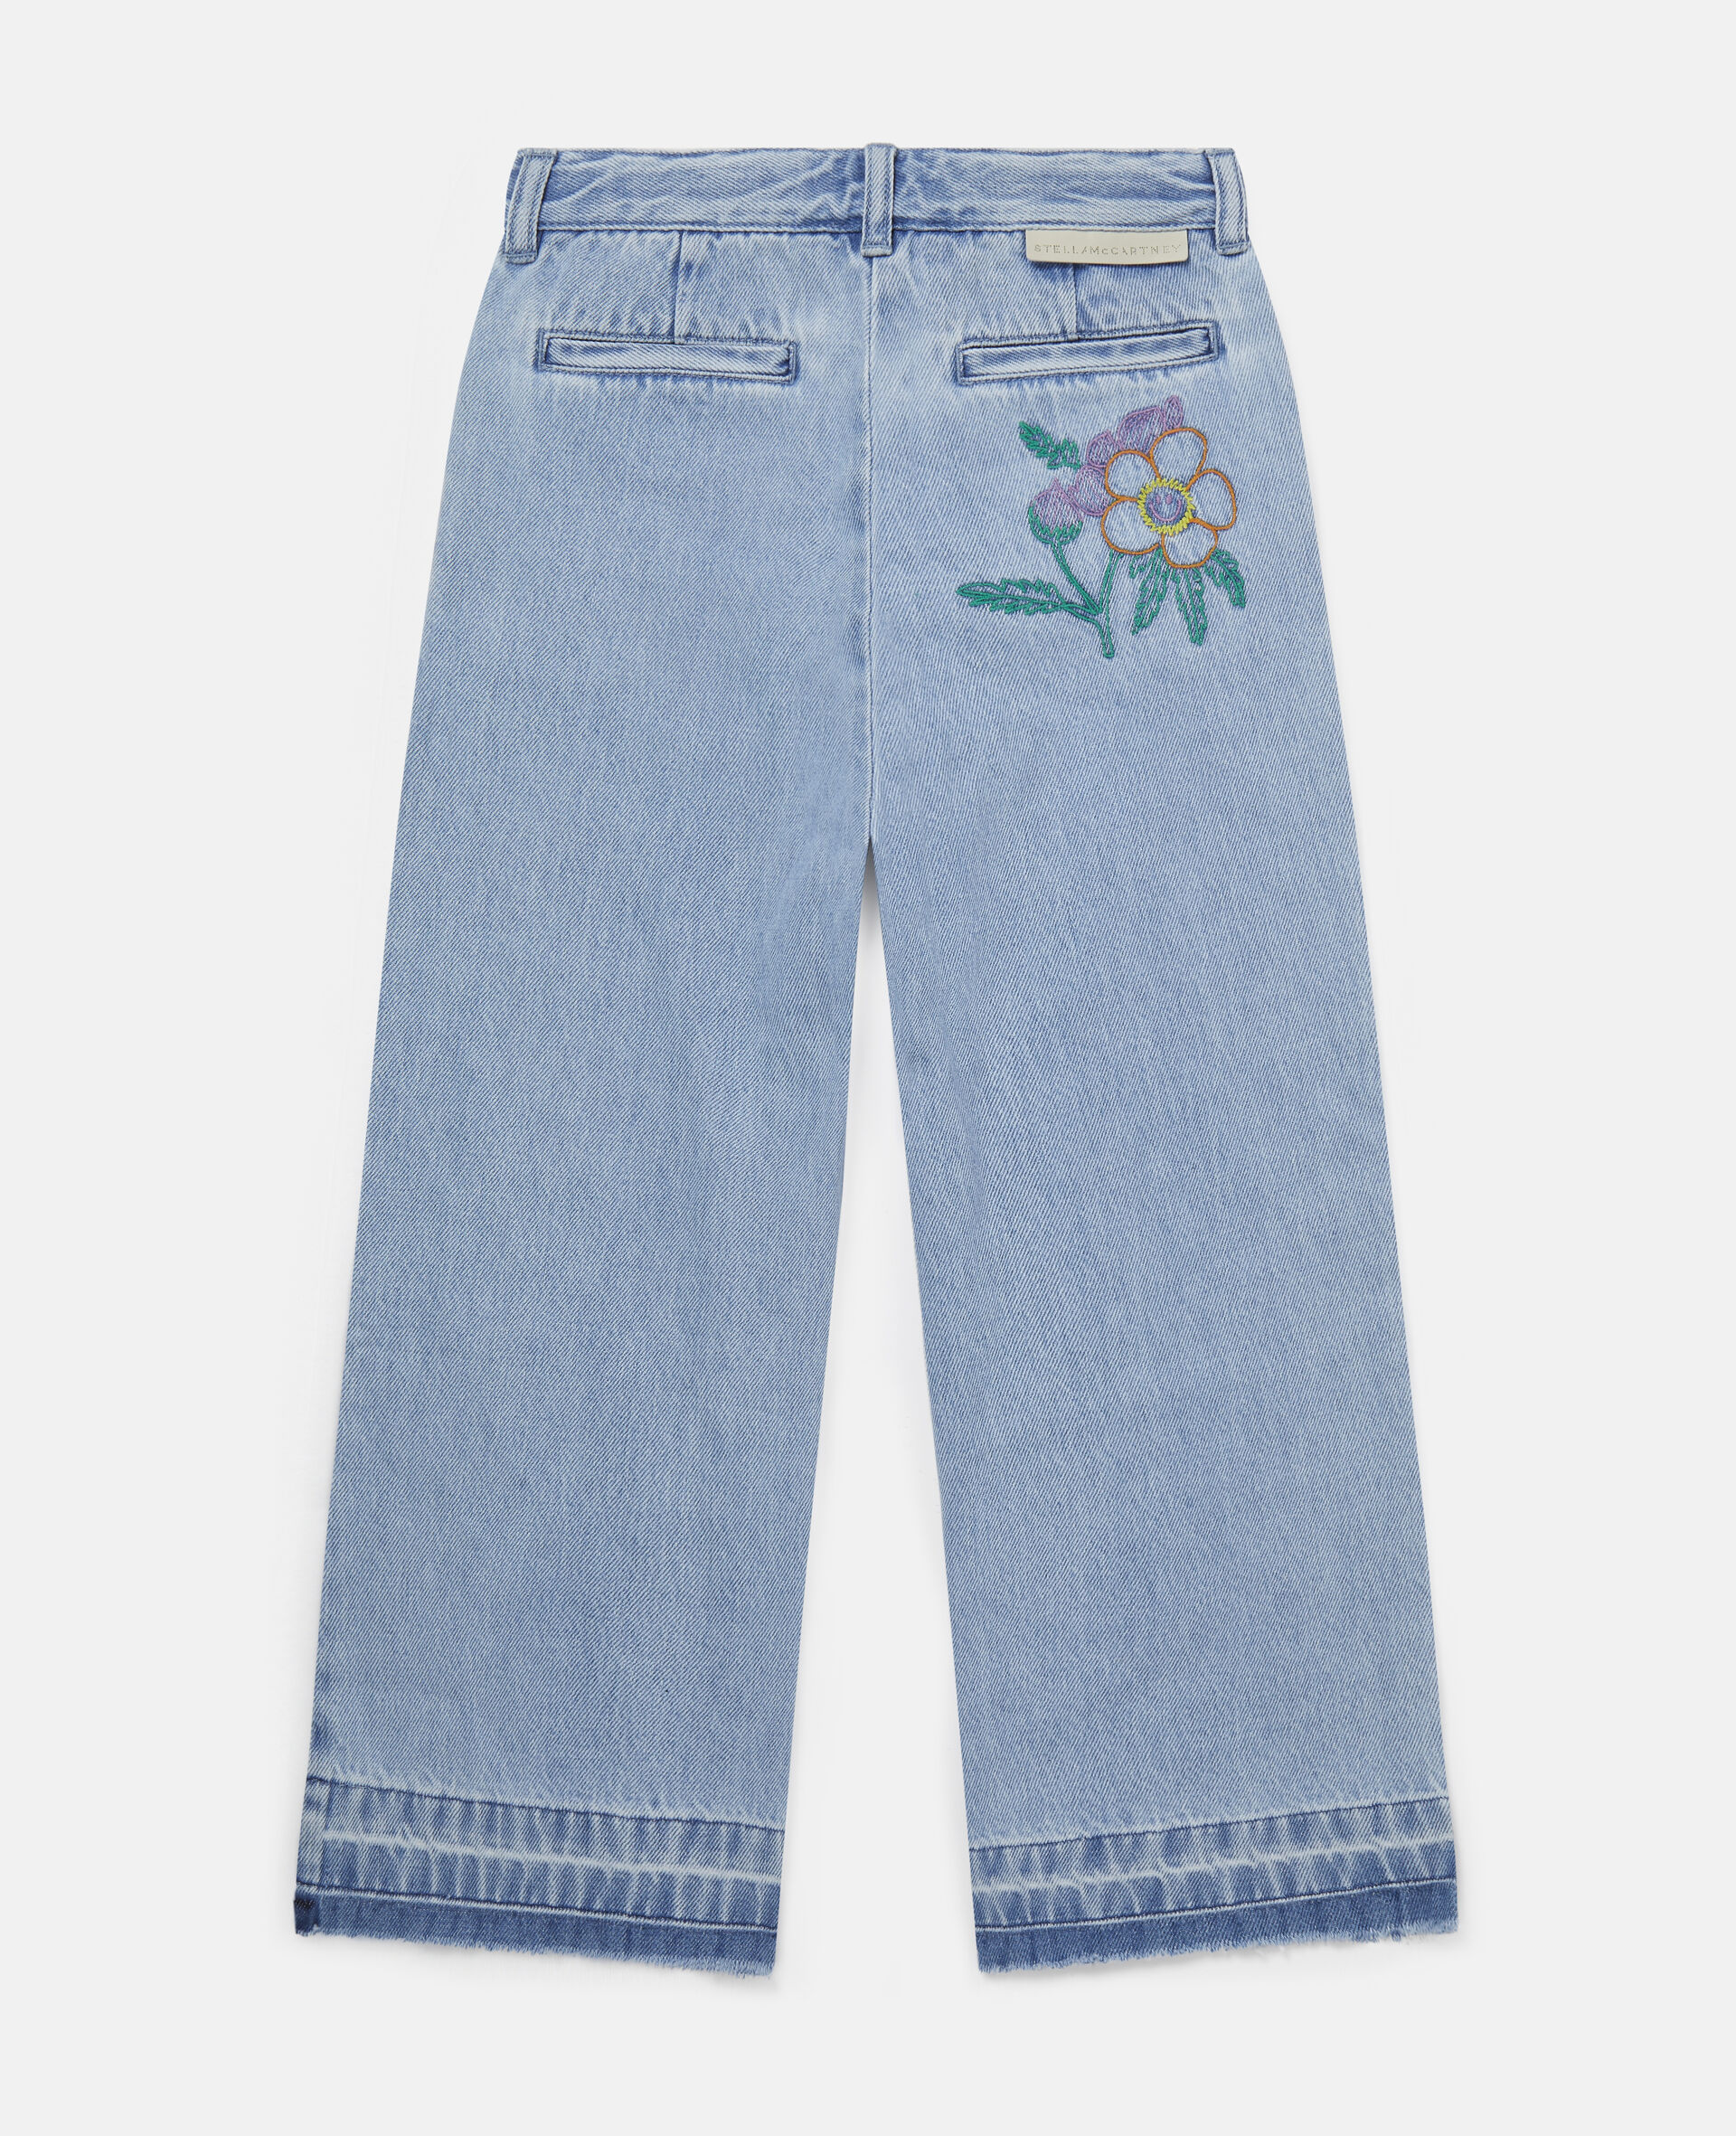 Flower Embroidered Denim Trousers-Blue-large image number 2